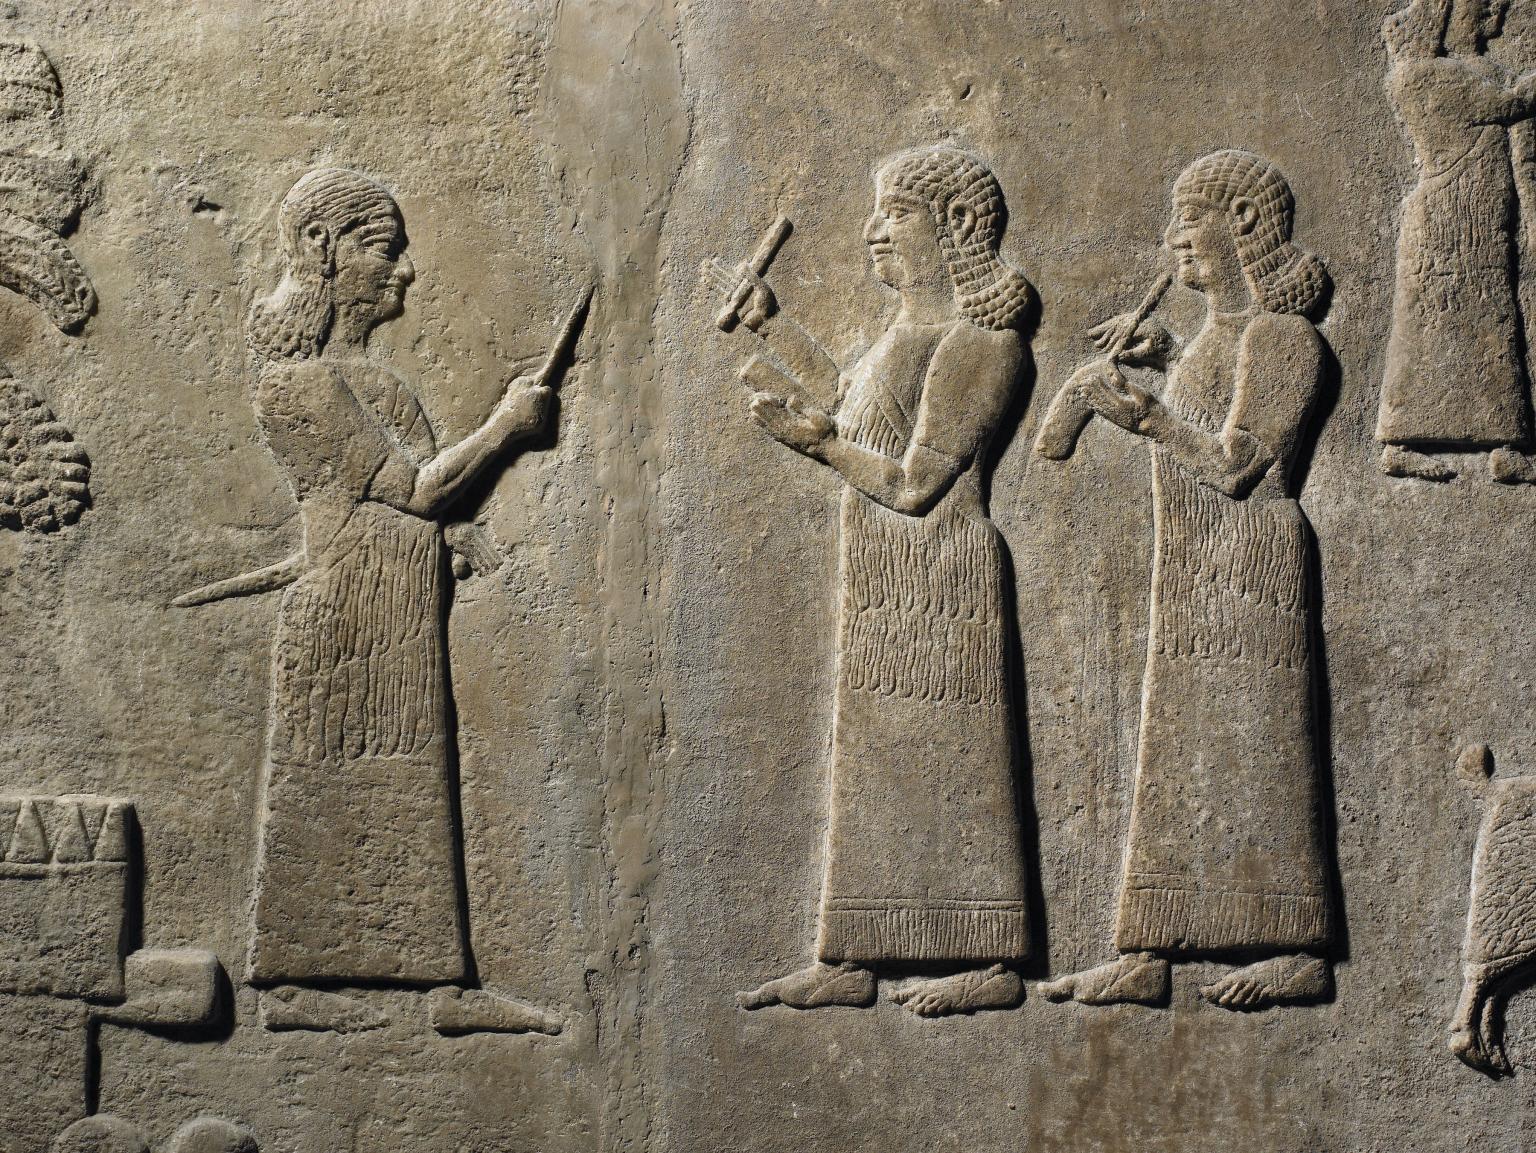 Relief of two standing figures in profile, wearing long tunics and curly hair, writing and another figure standing opposite them.